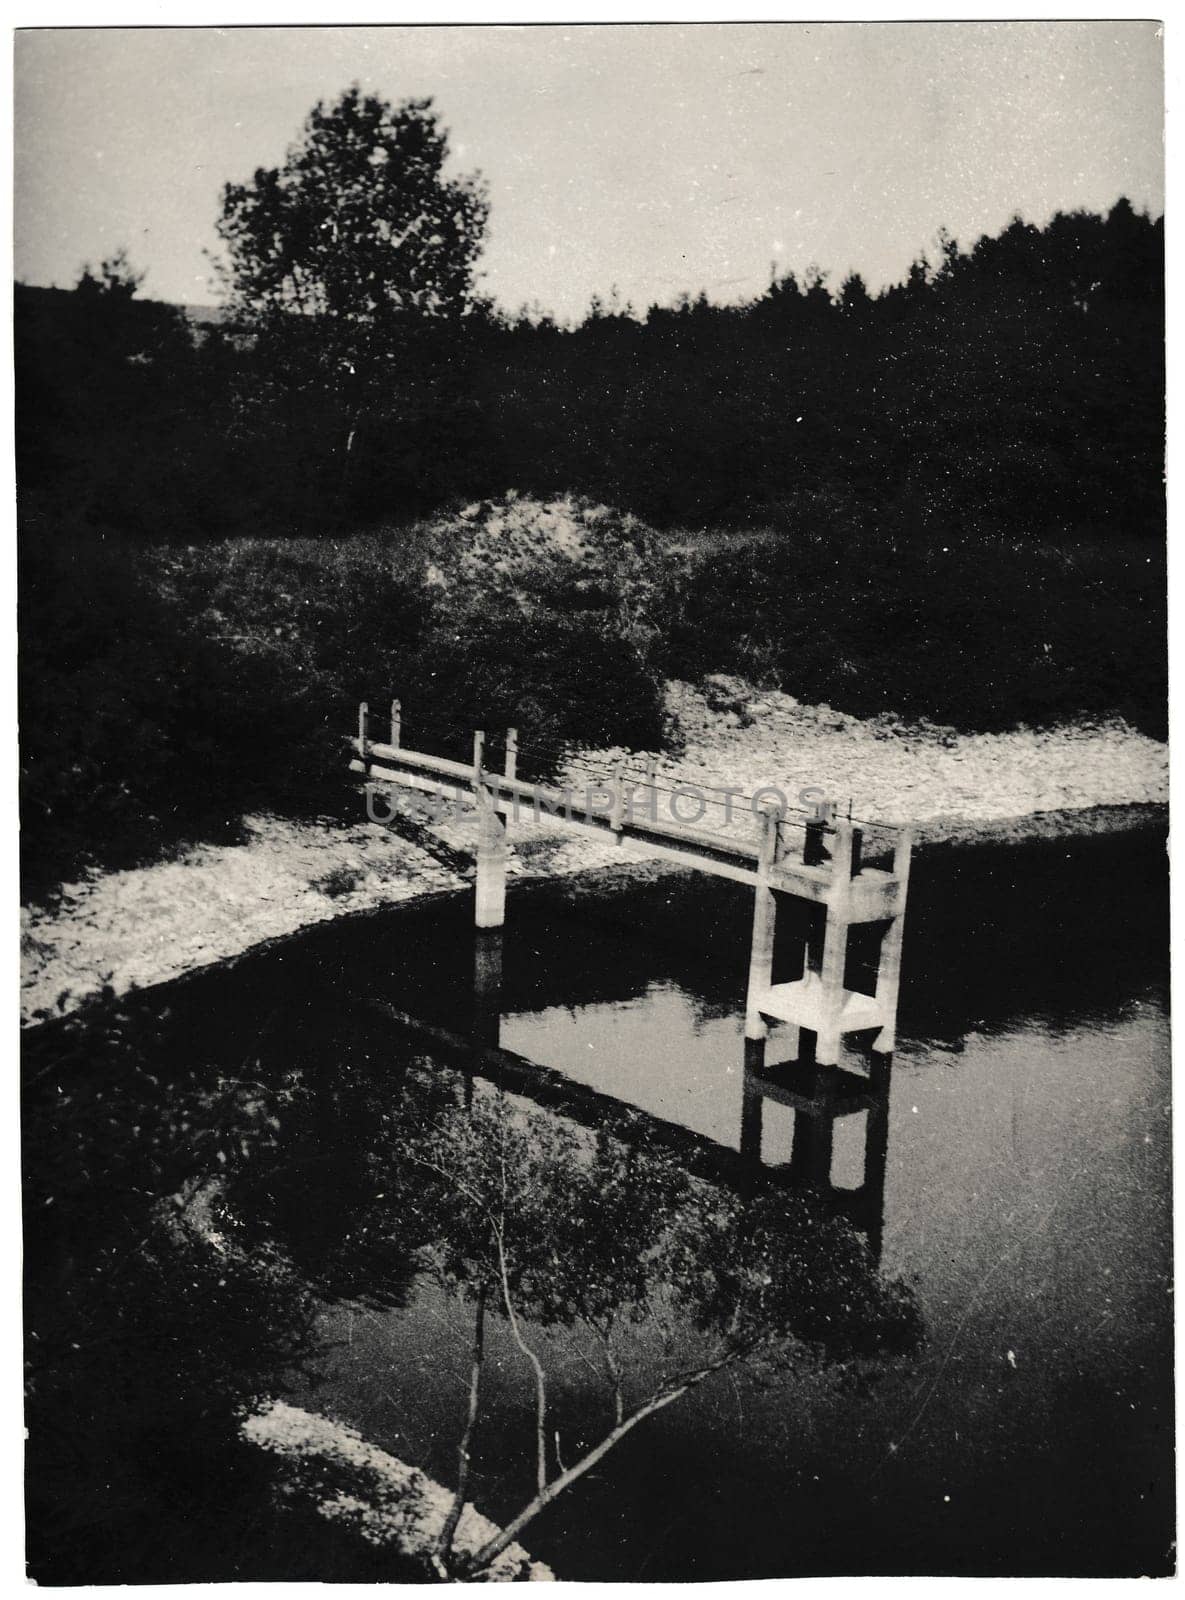 Retro photo shows sluice gate in the pond. Black and white vintage photography. by roman_nerud